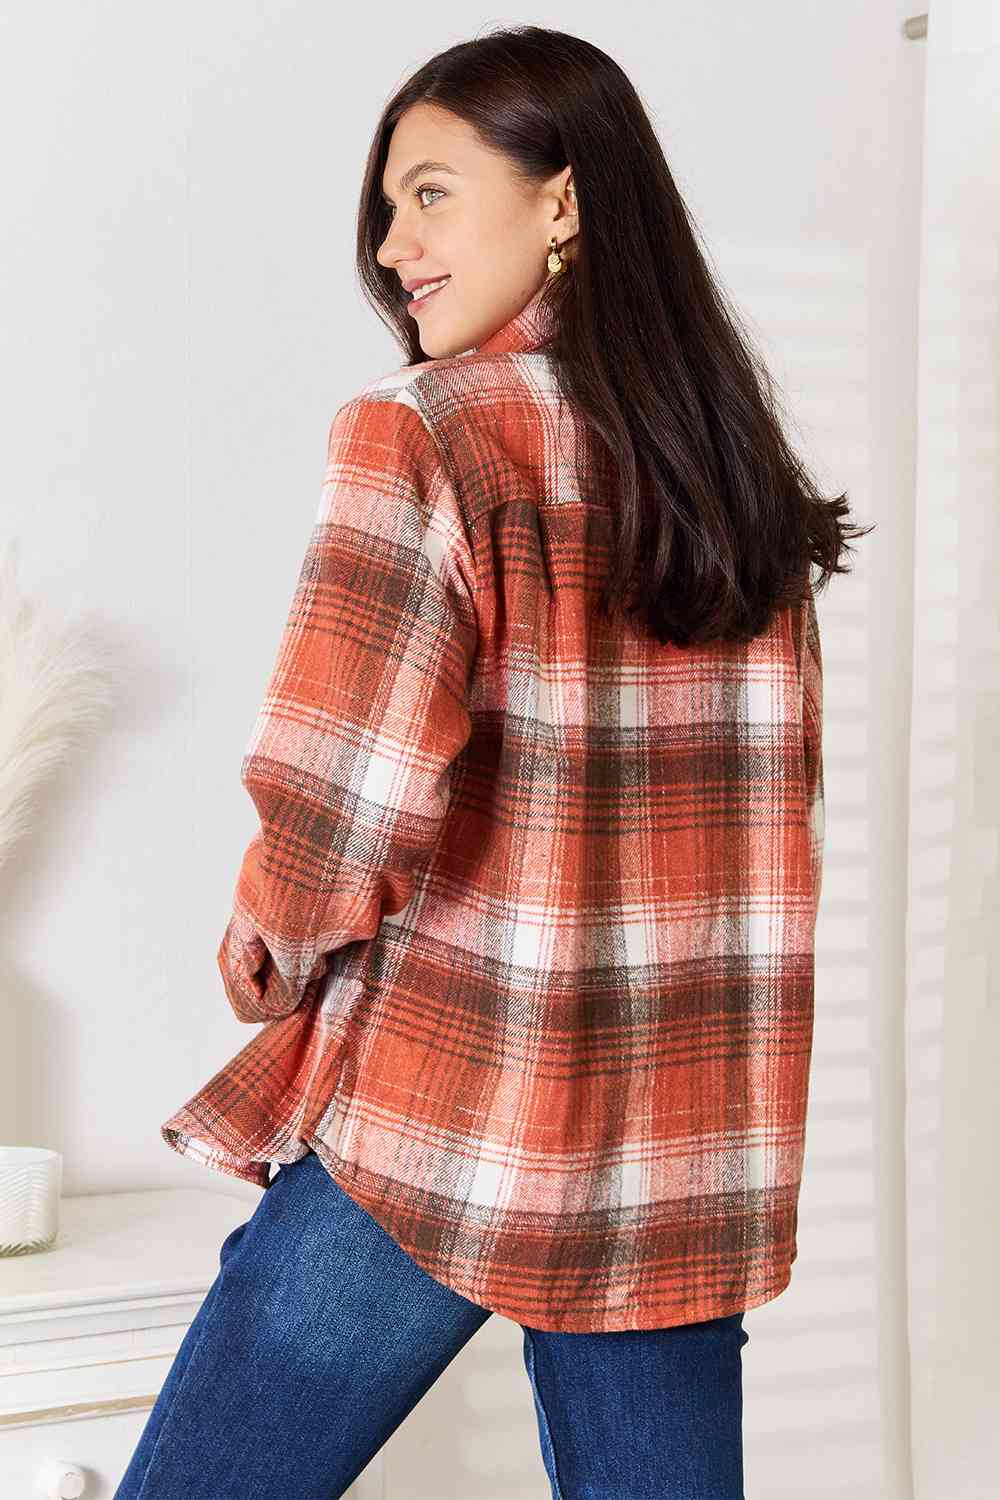 Double Trouble Plaid Shirt - Cheeky Chic Boutique